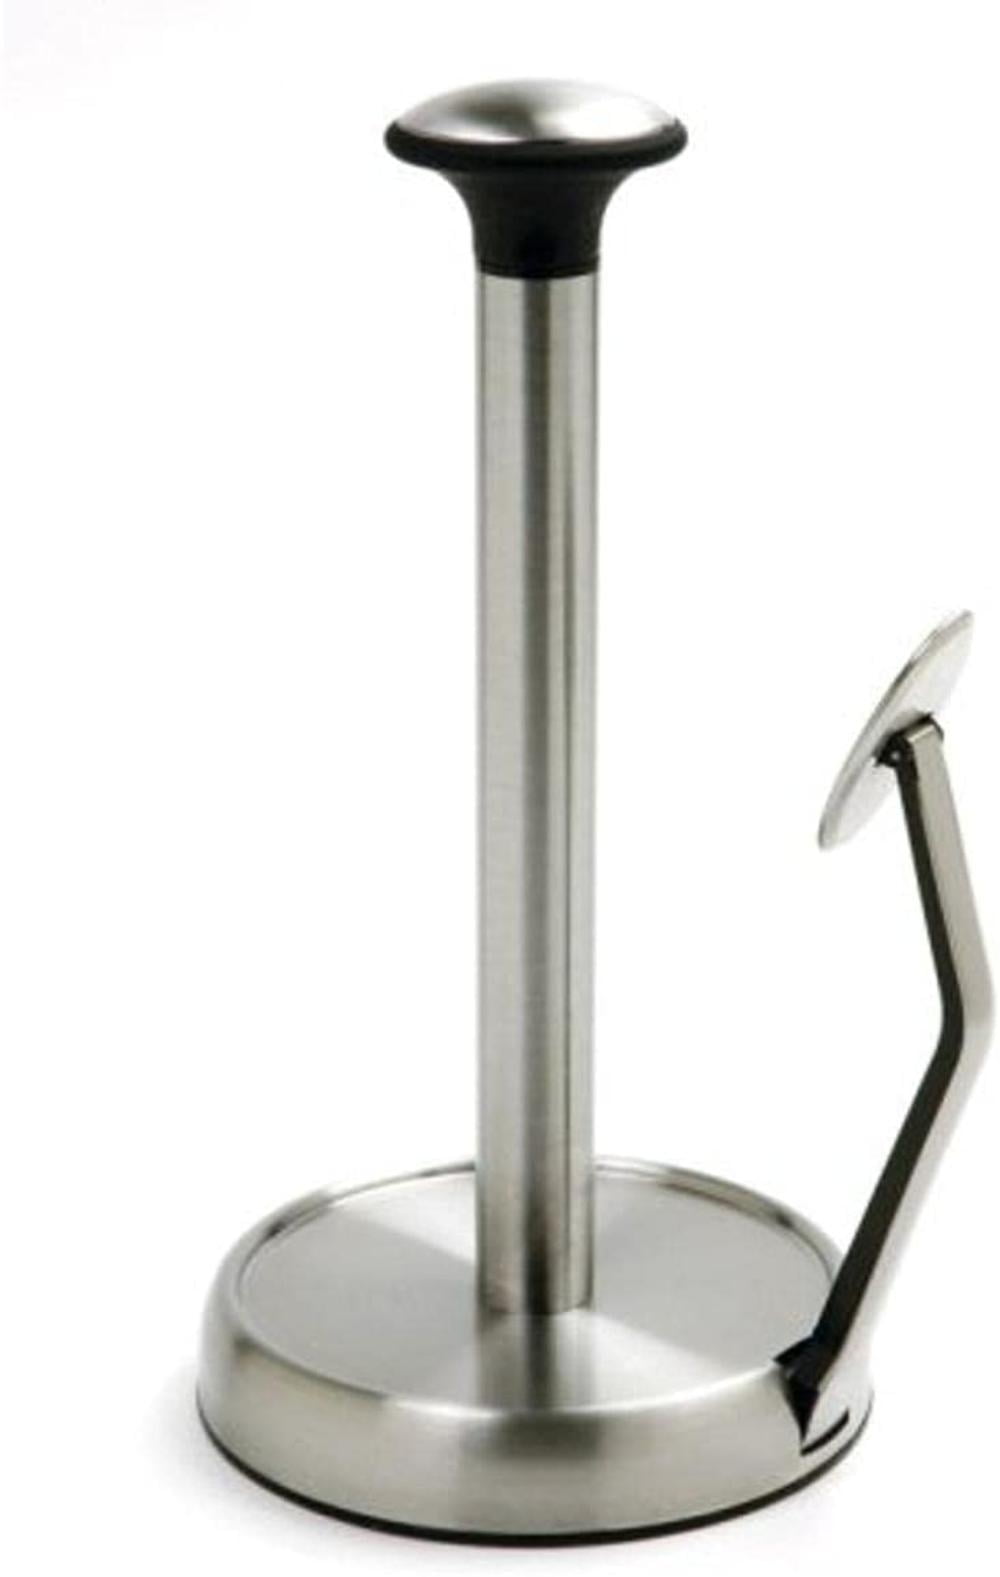 Norpro 14 High Stainless Steel Towel Holder with Nonslip Stable Suction Grip Base 